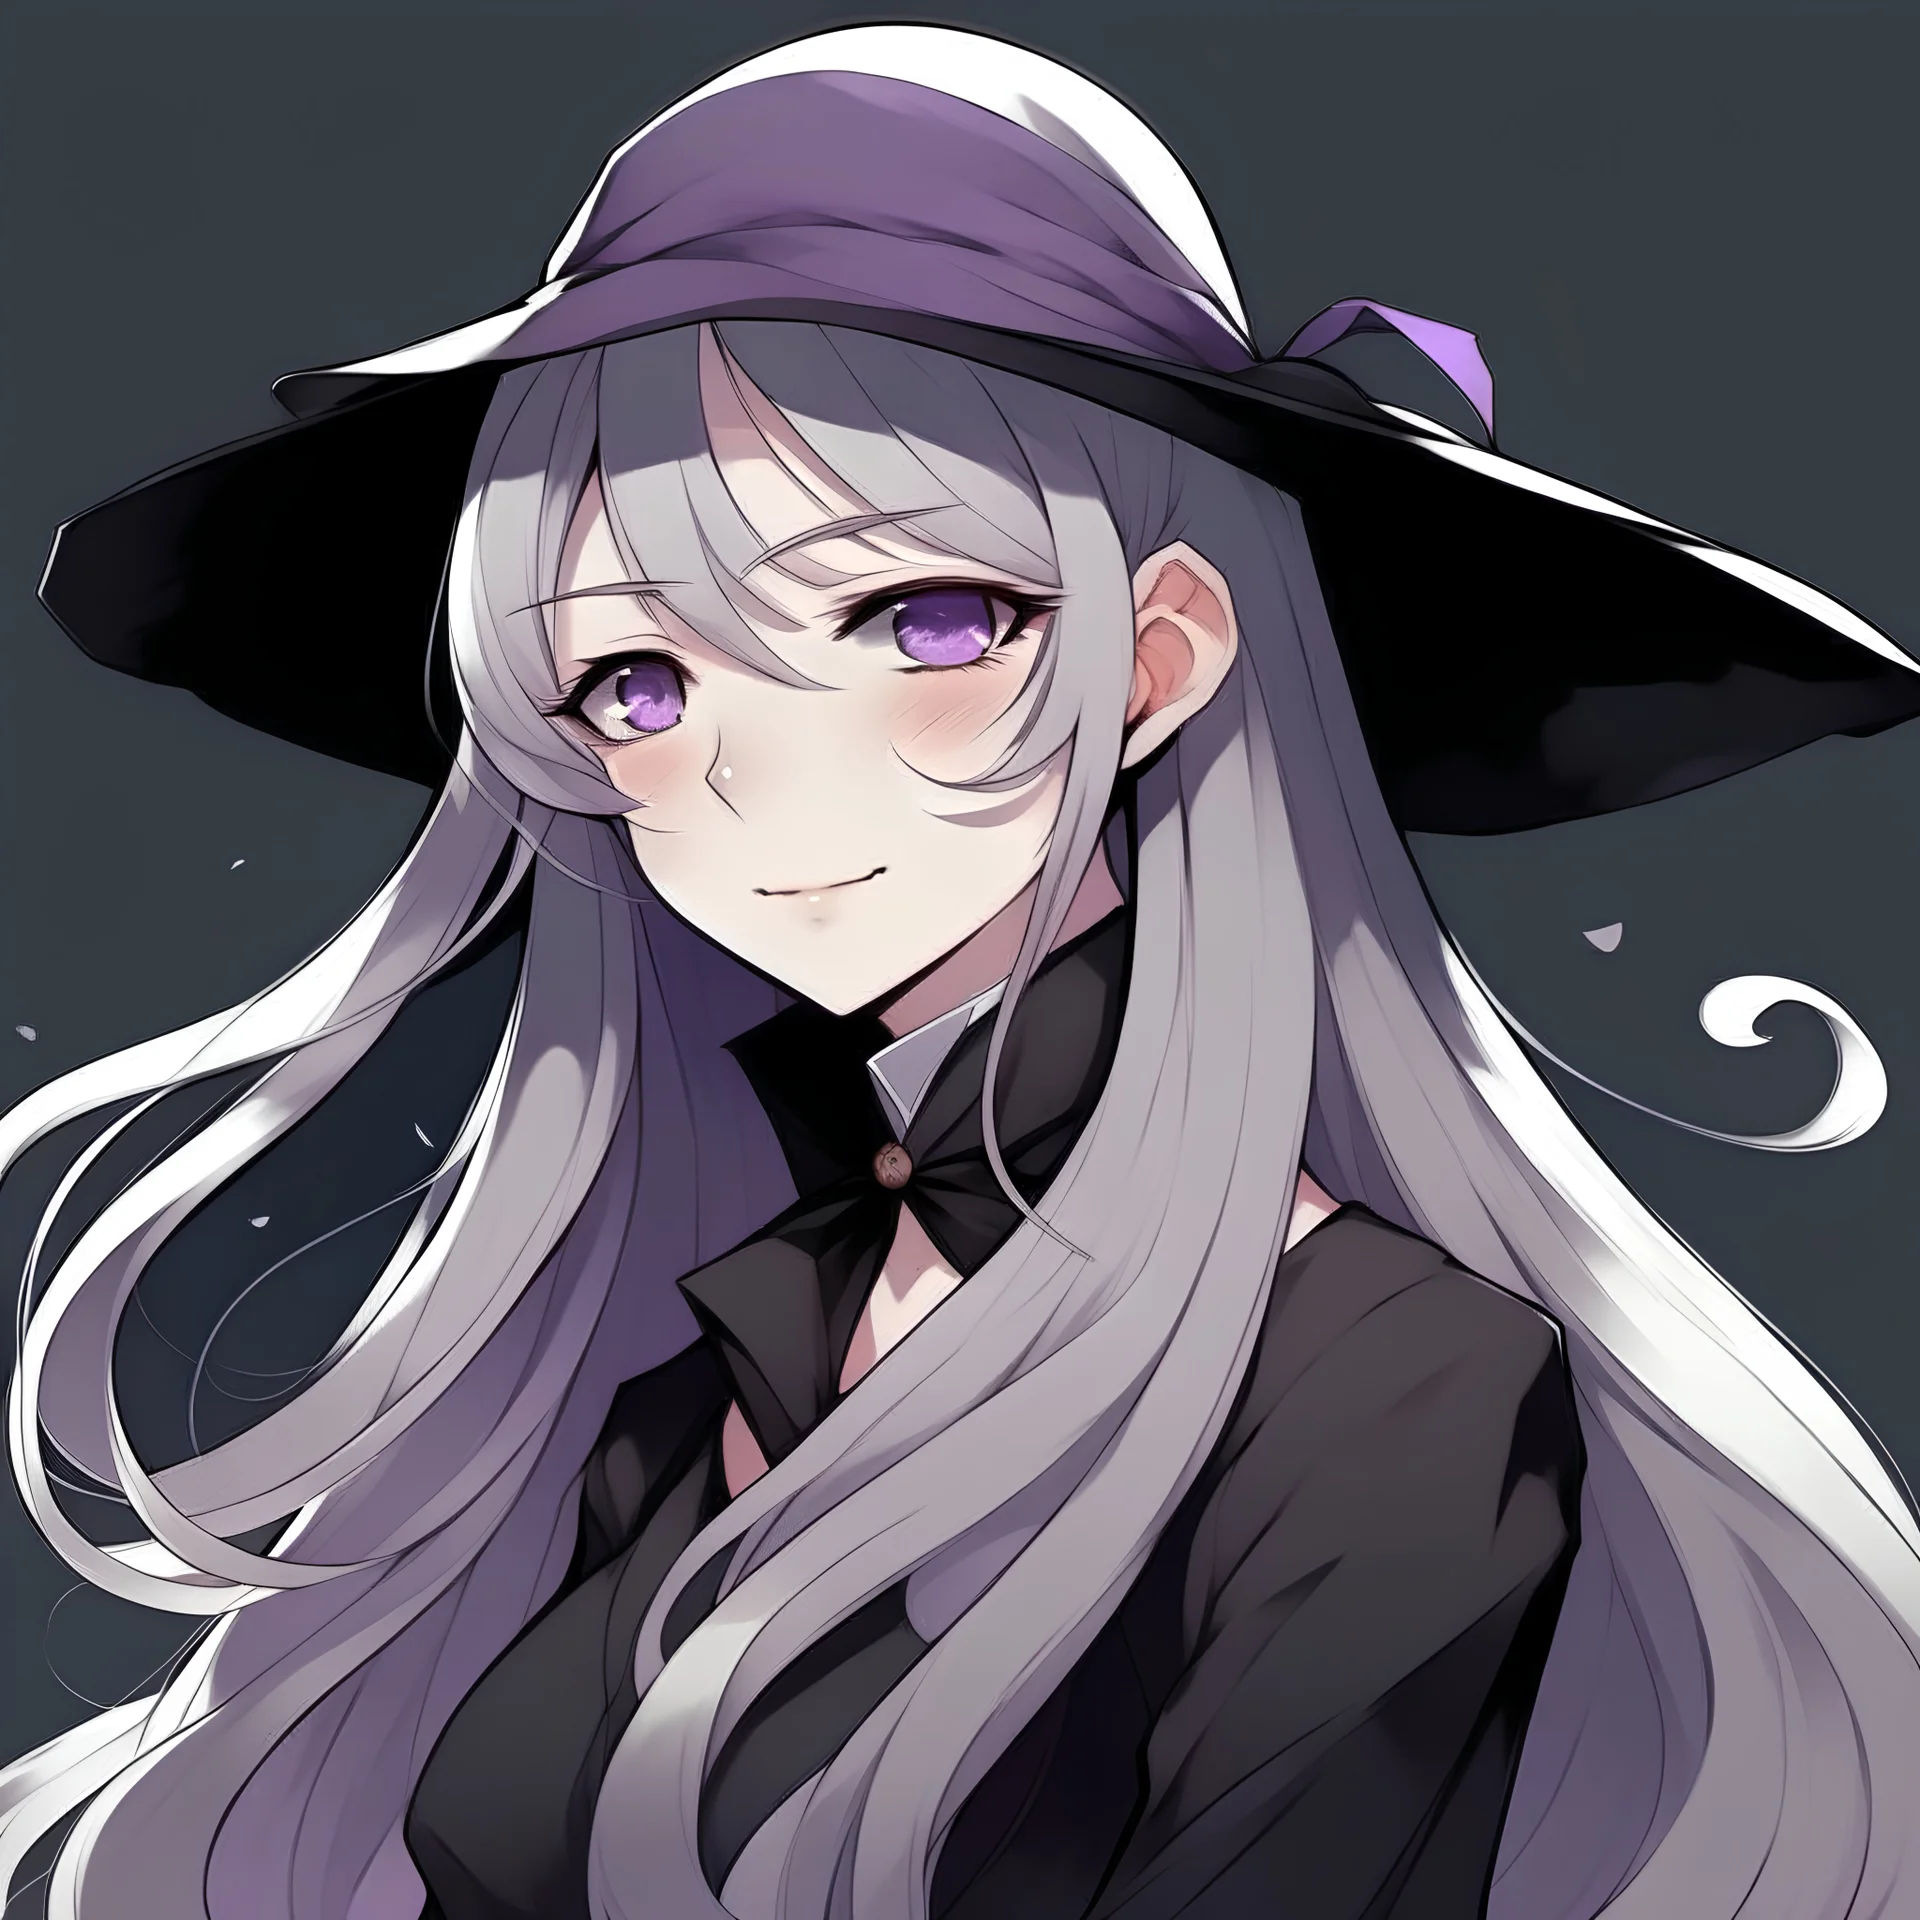 A woman, white skin, long white hair, bangs covering her right eye, left eye is purple. Wearing a black dress and a black top hat, Japanese anime style